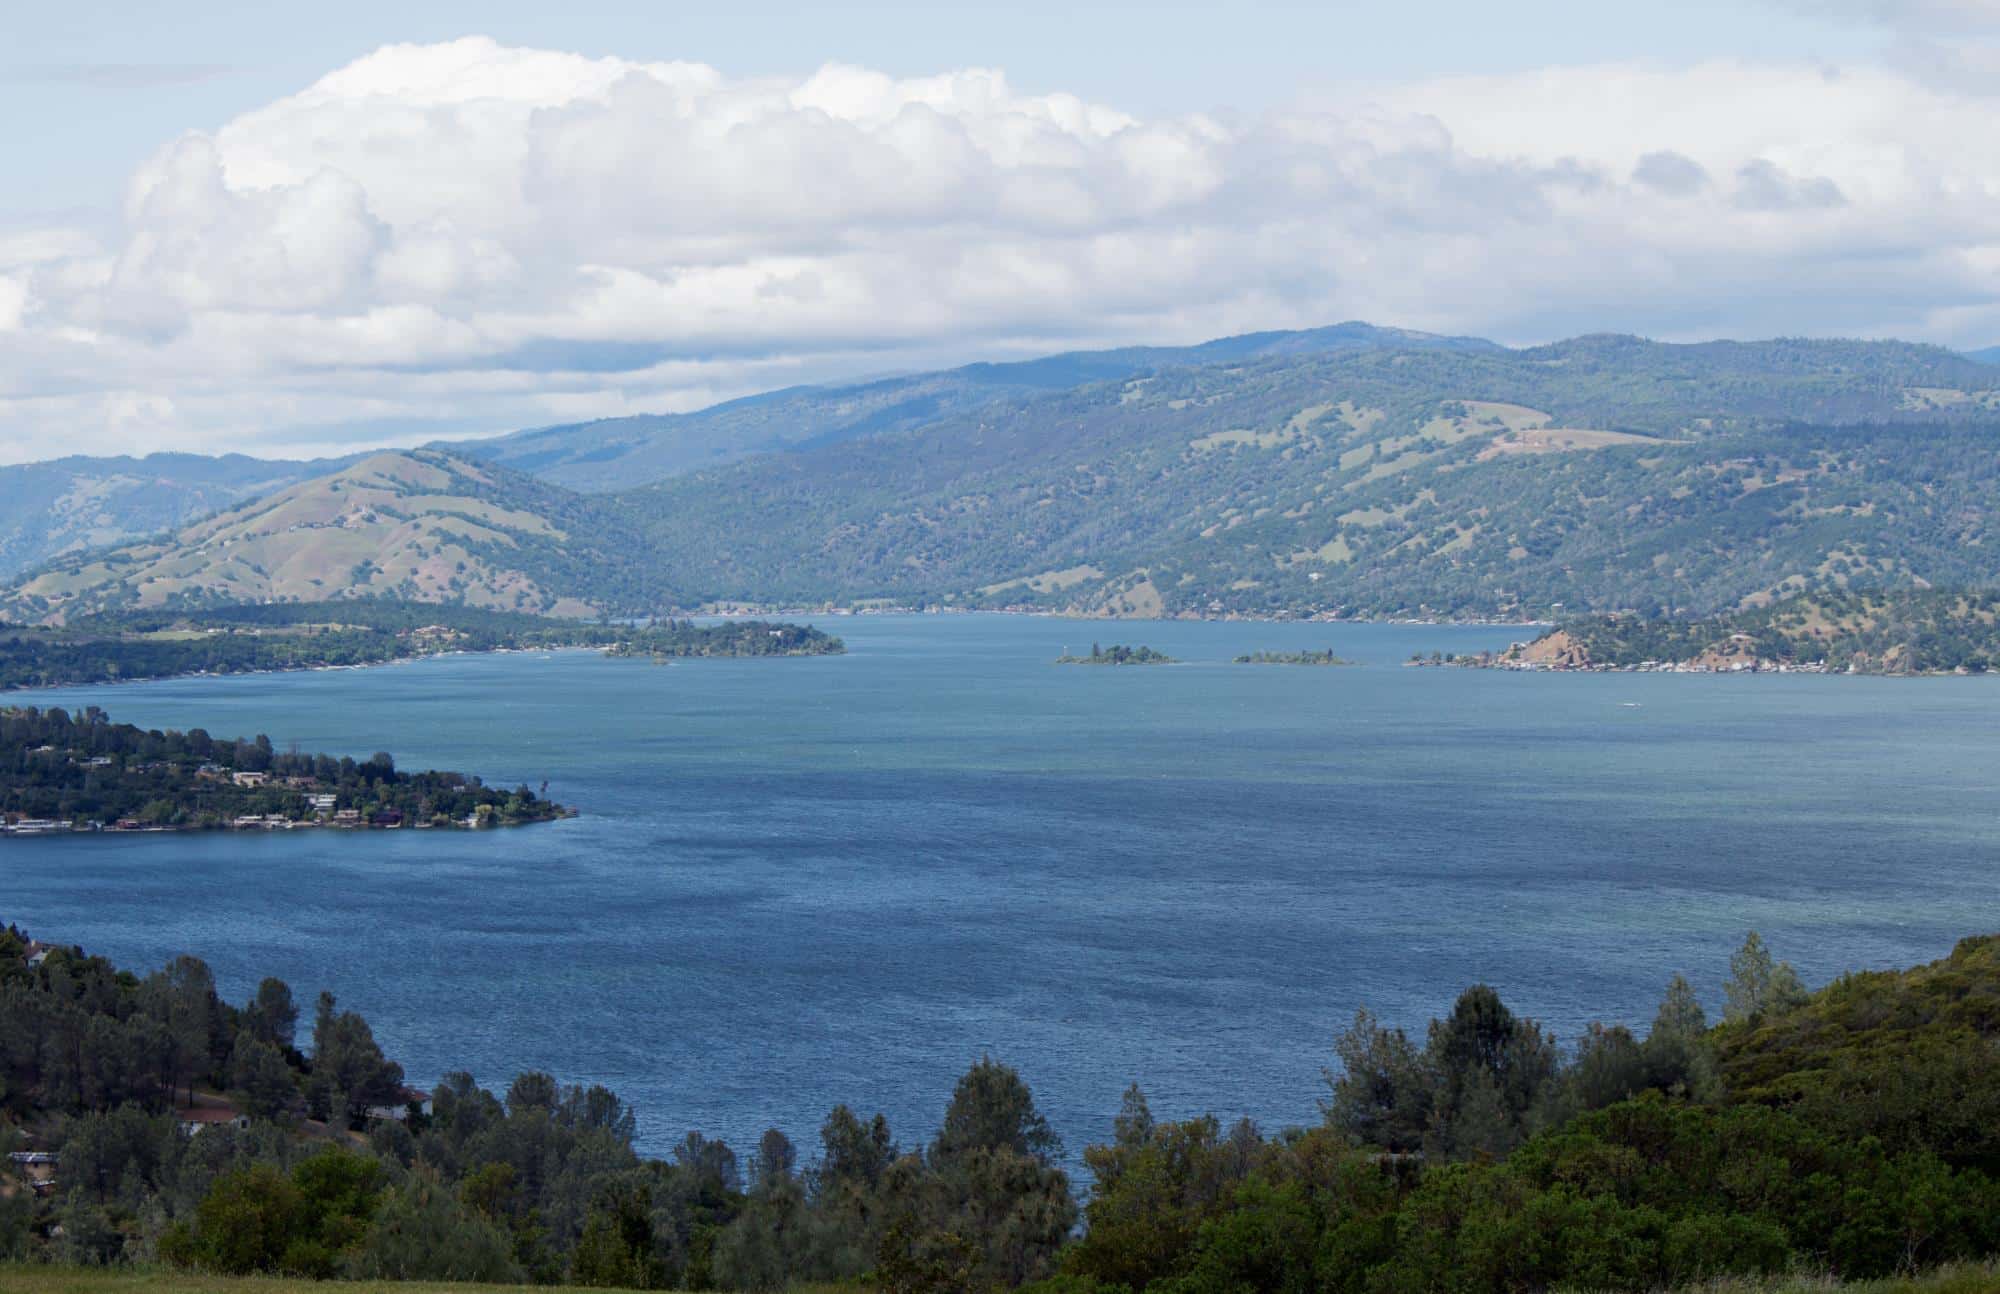 Largest natural lake in California. Beautiful mountaintop view of the lake and surrounding mountains in Clearlake, CA